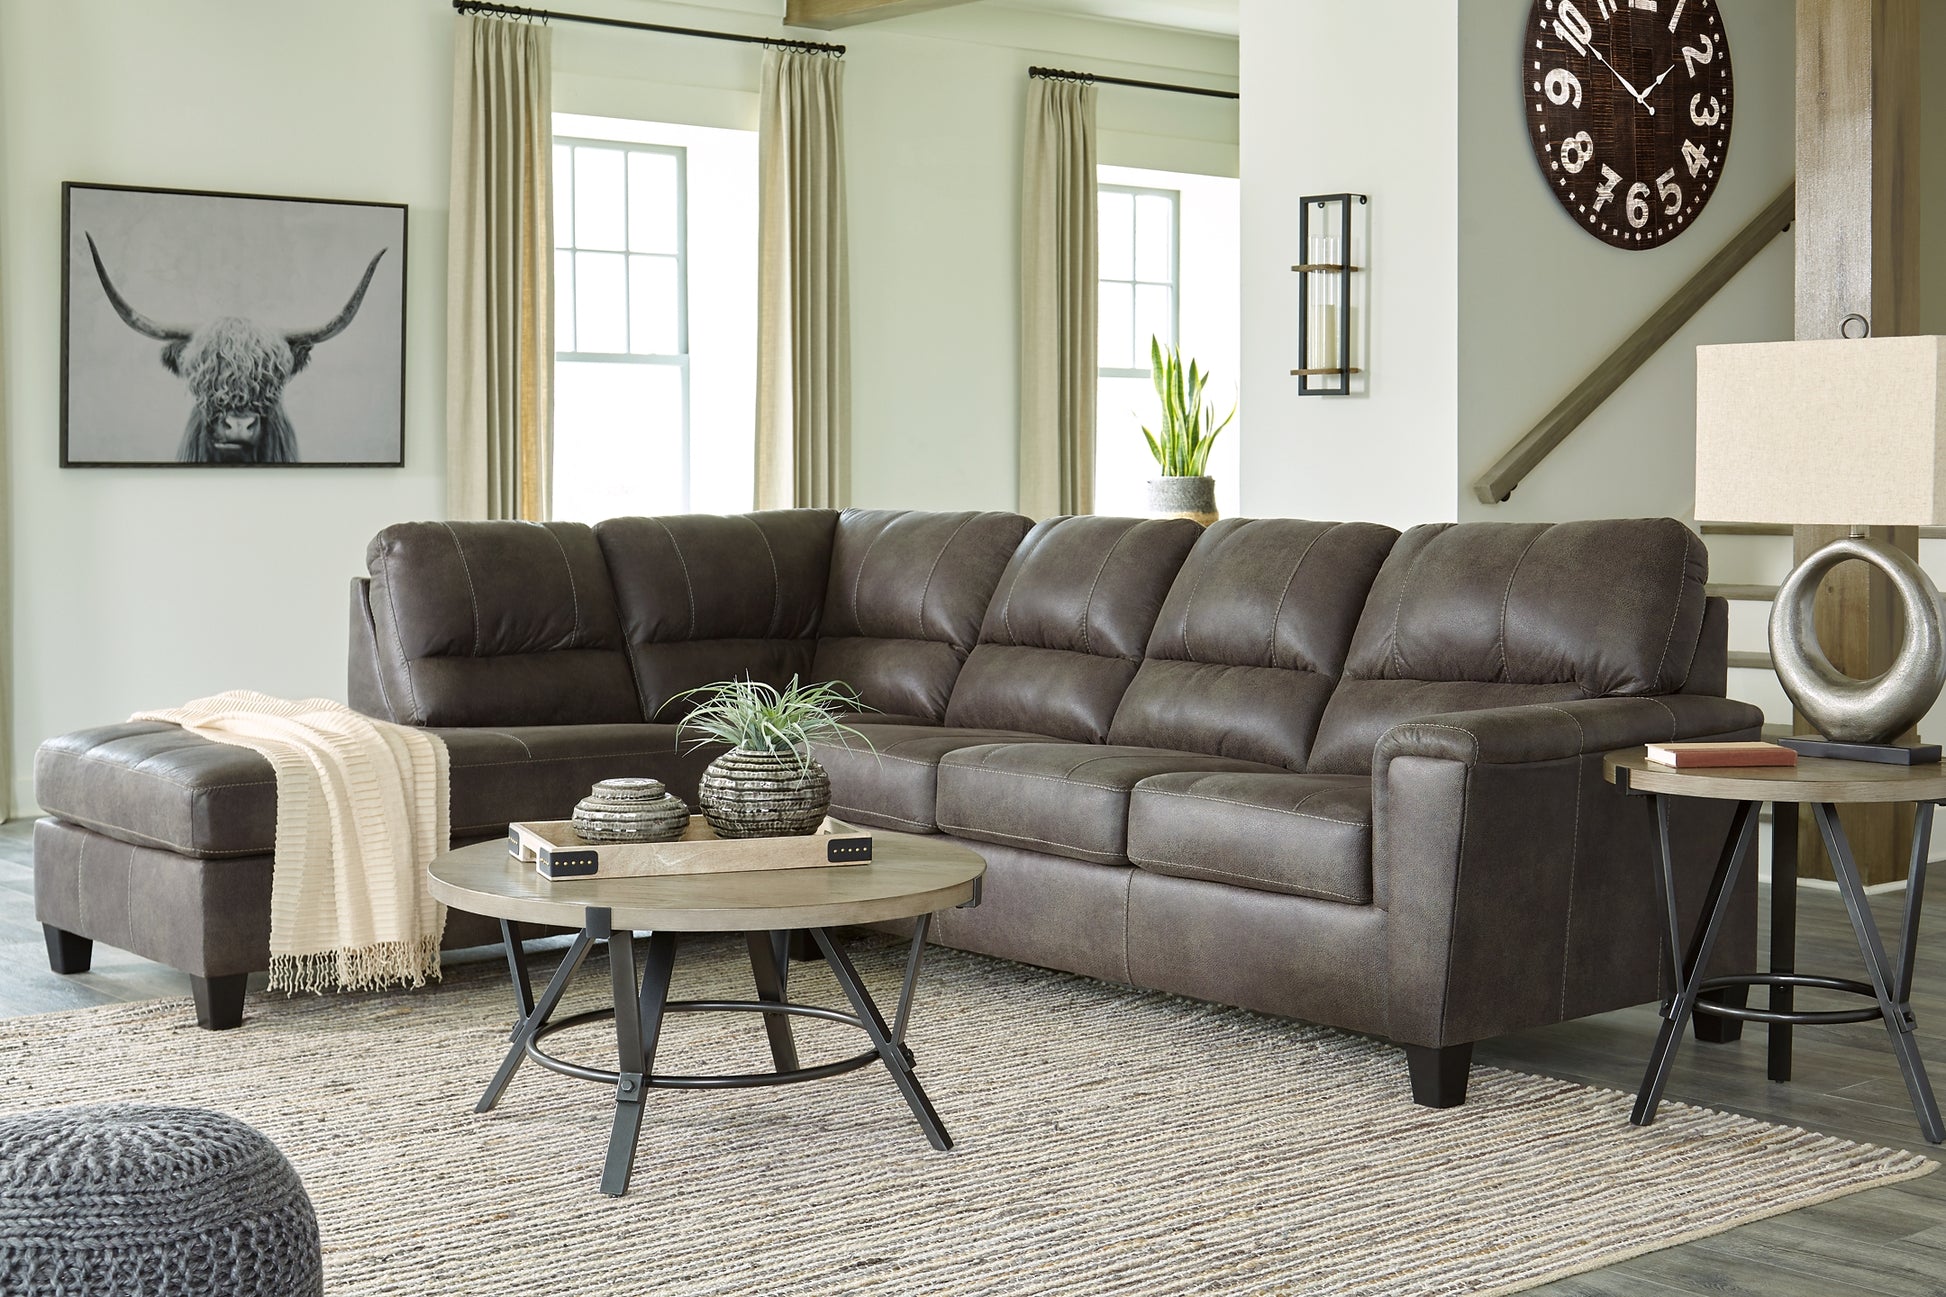 Navi 2-Piece Sleeper Sectional with Chaise JB's Furniture  Home Furniture, Home Decor, Furniture Store